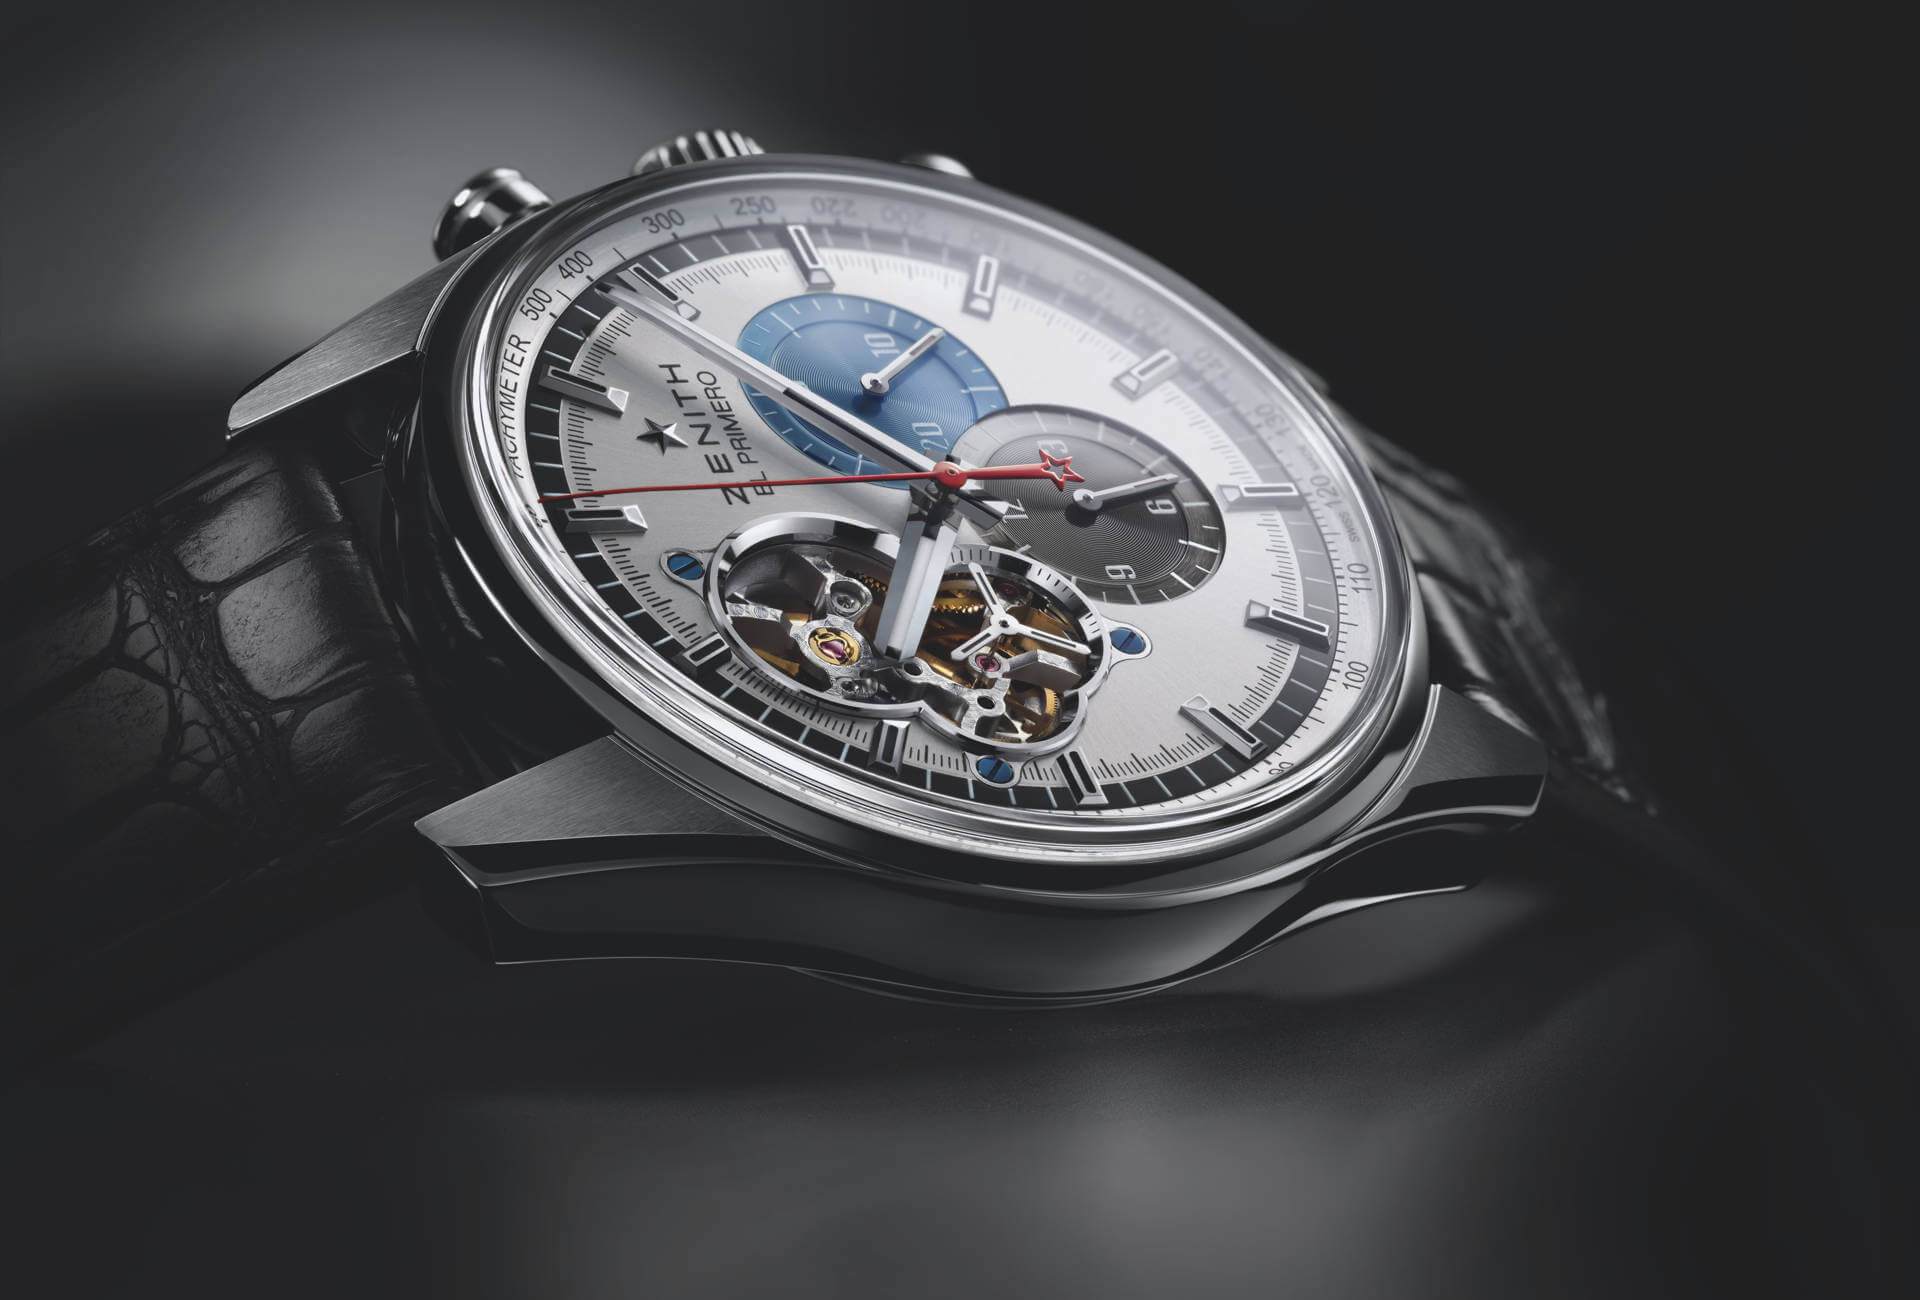 Zenith Introduces the Final Remake of the Original, 1969 El